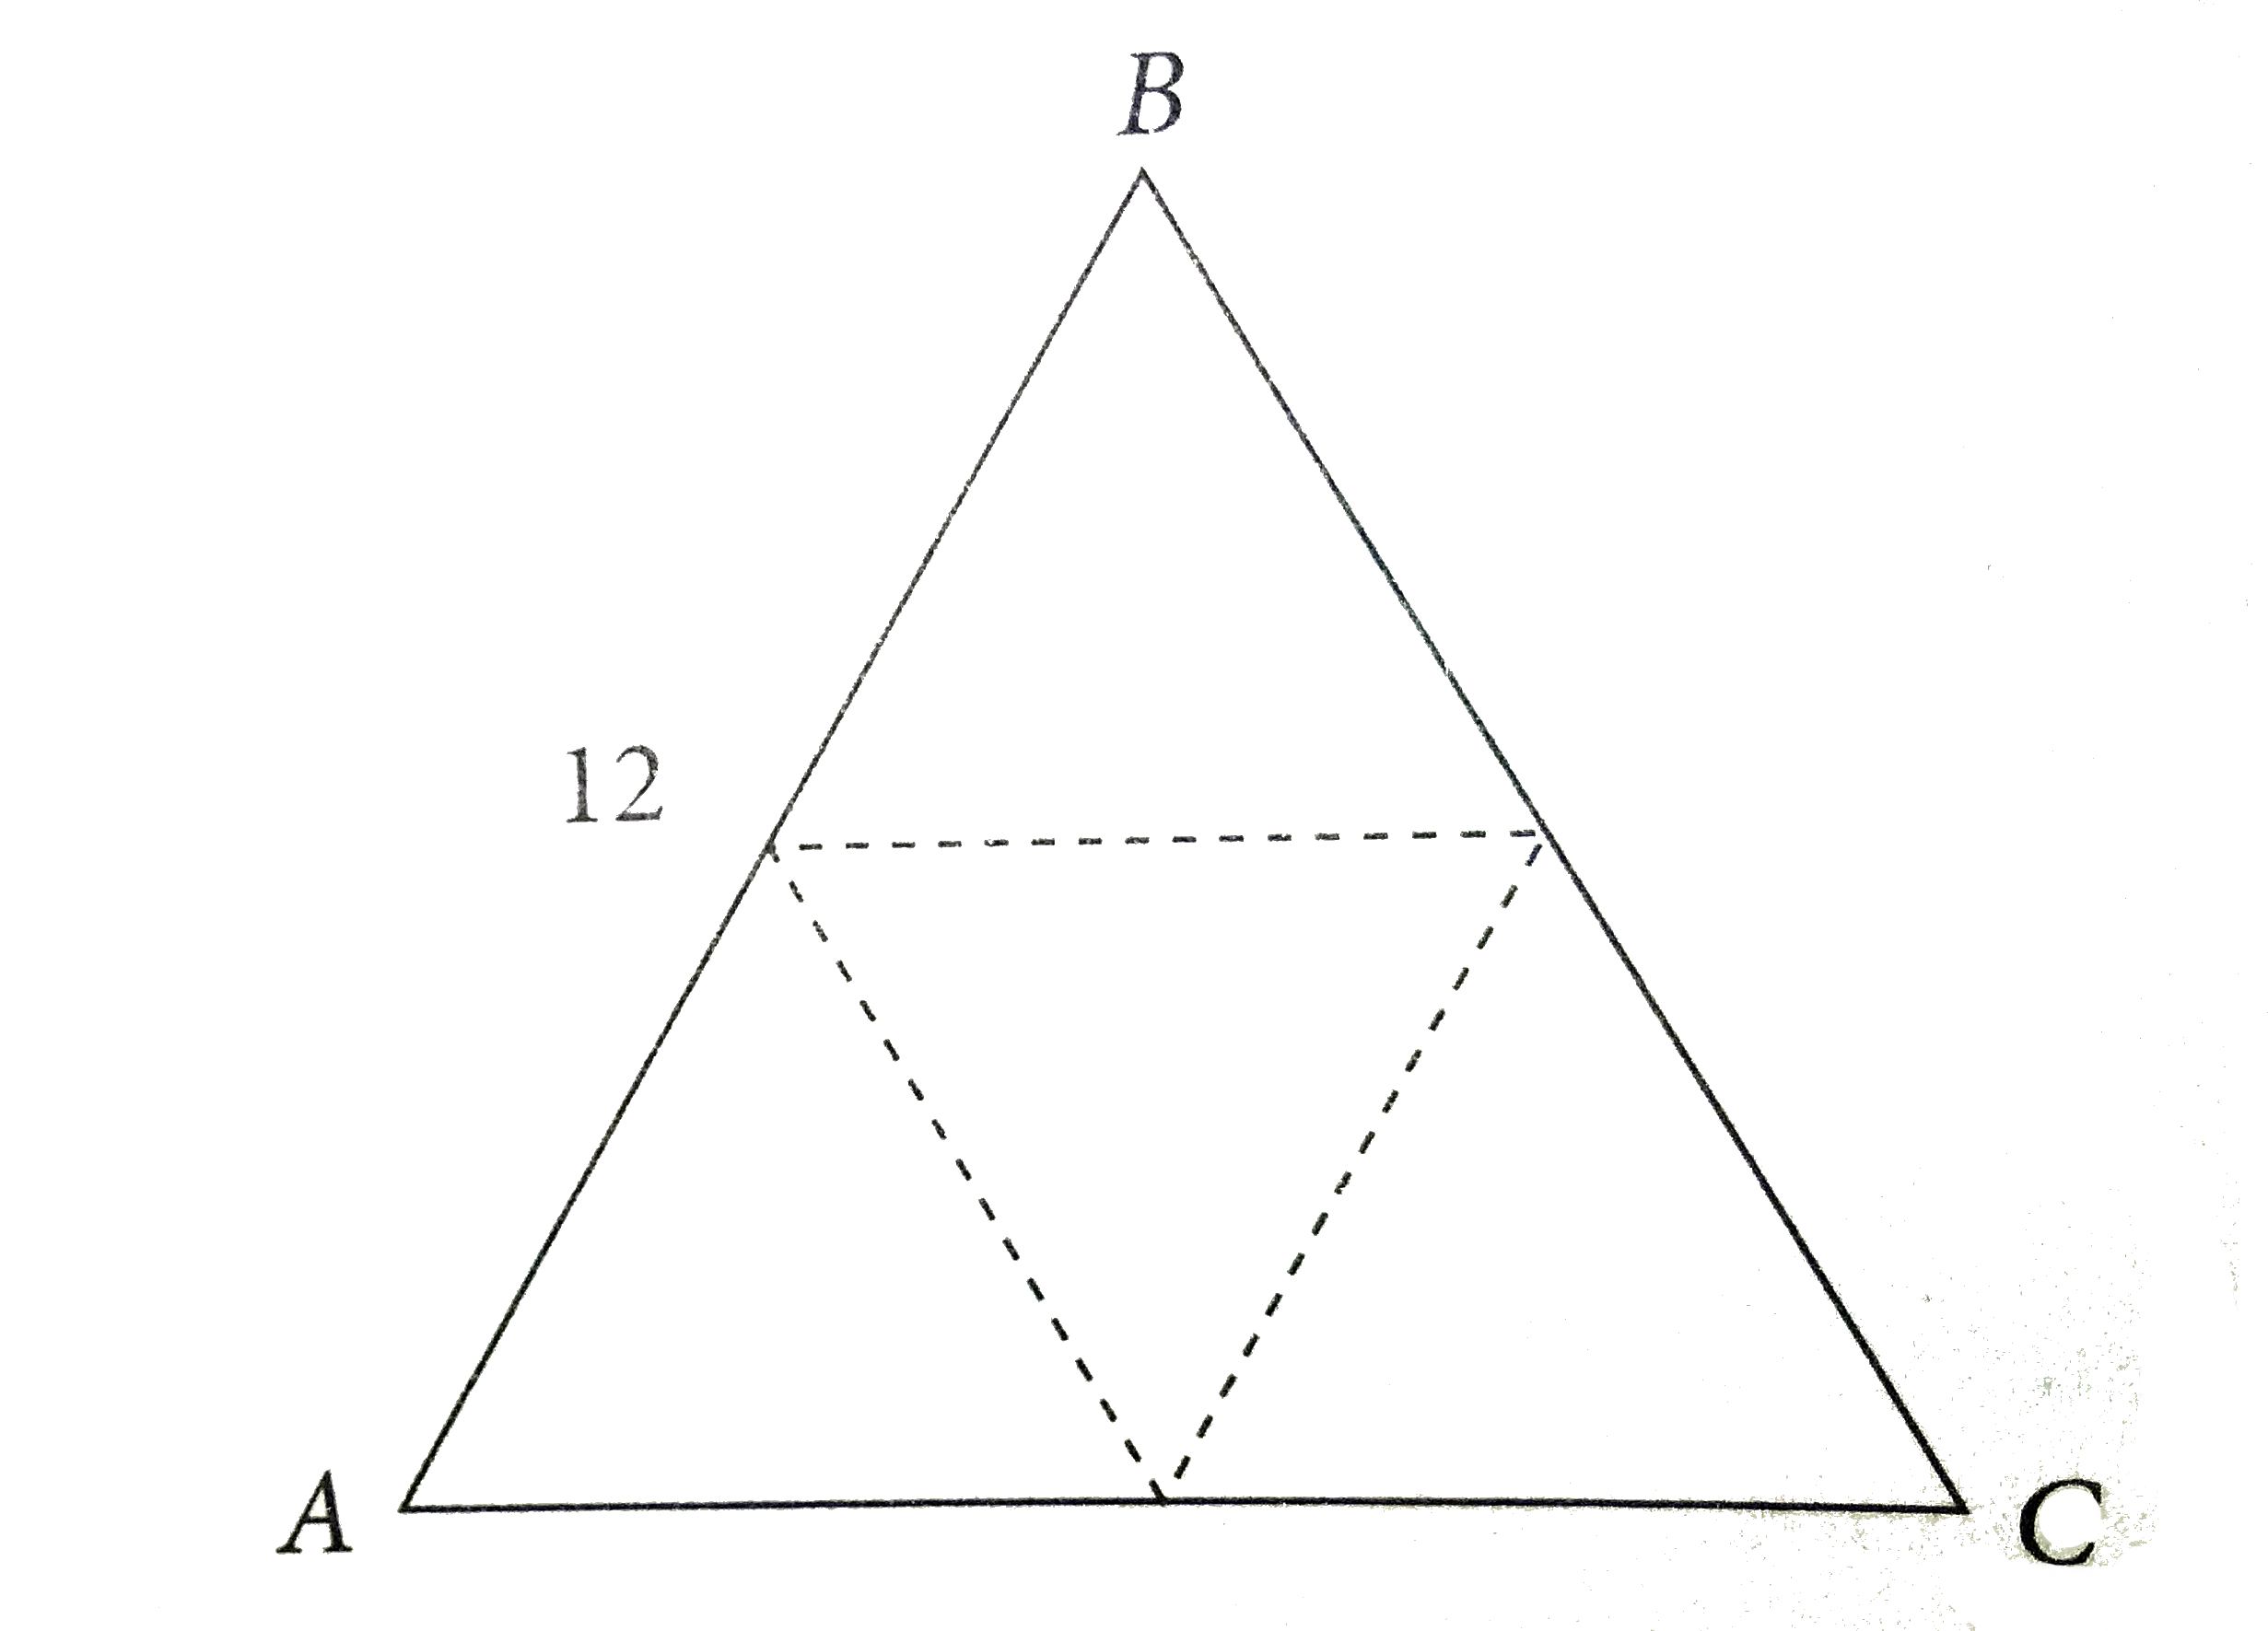 If equilibrium  triangle  ABC  is cut  by three  lines  , as shows  , to form  four  equilibrium  triangles  of equal   area  , what is the  length  of a side  of one  of the smaller  triangles?